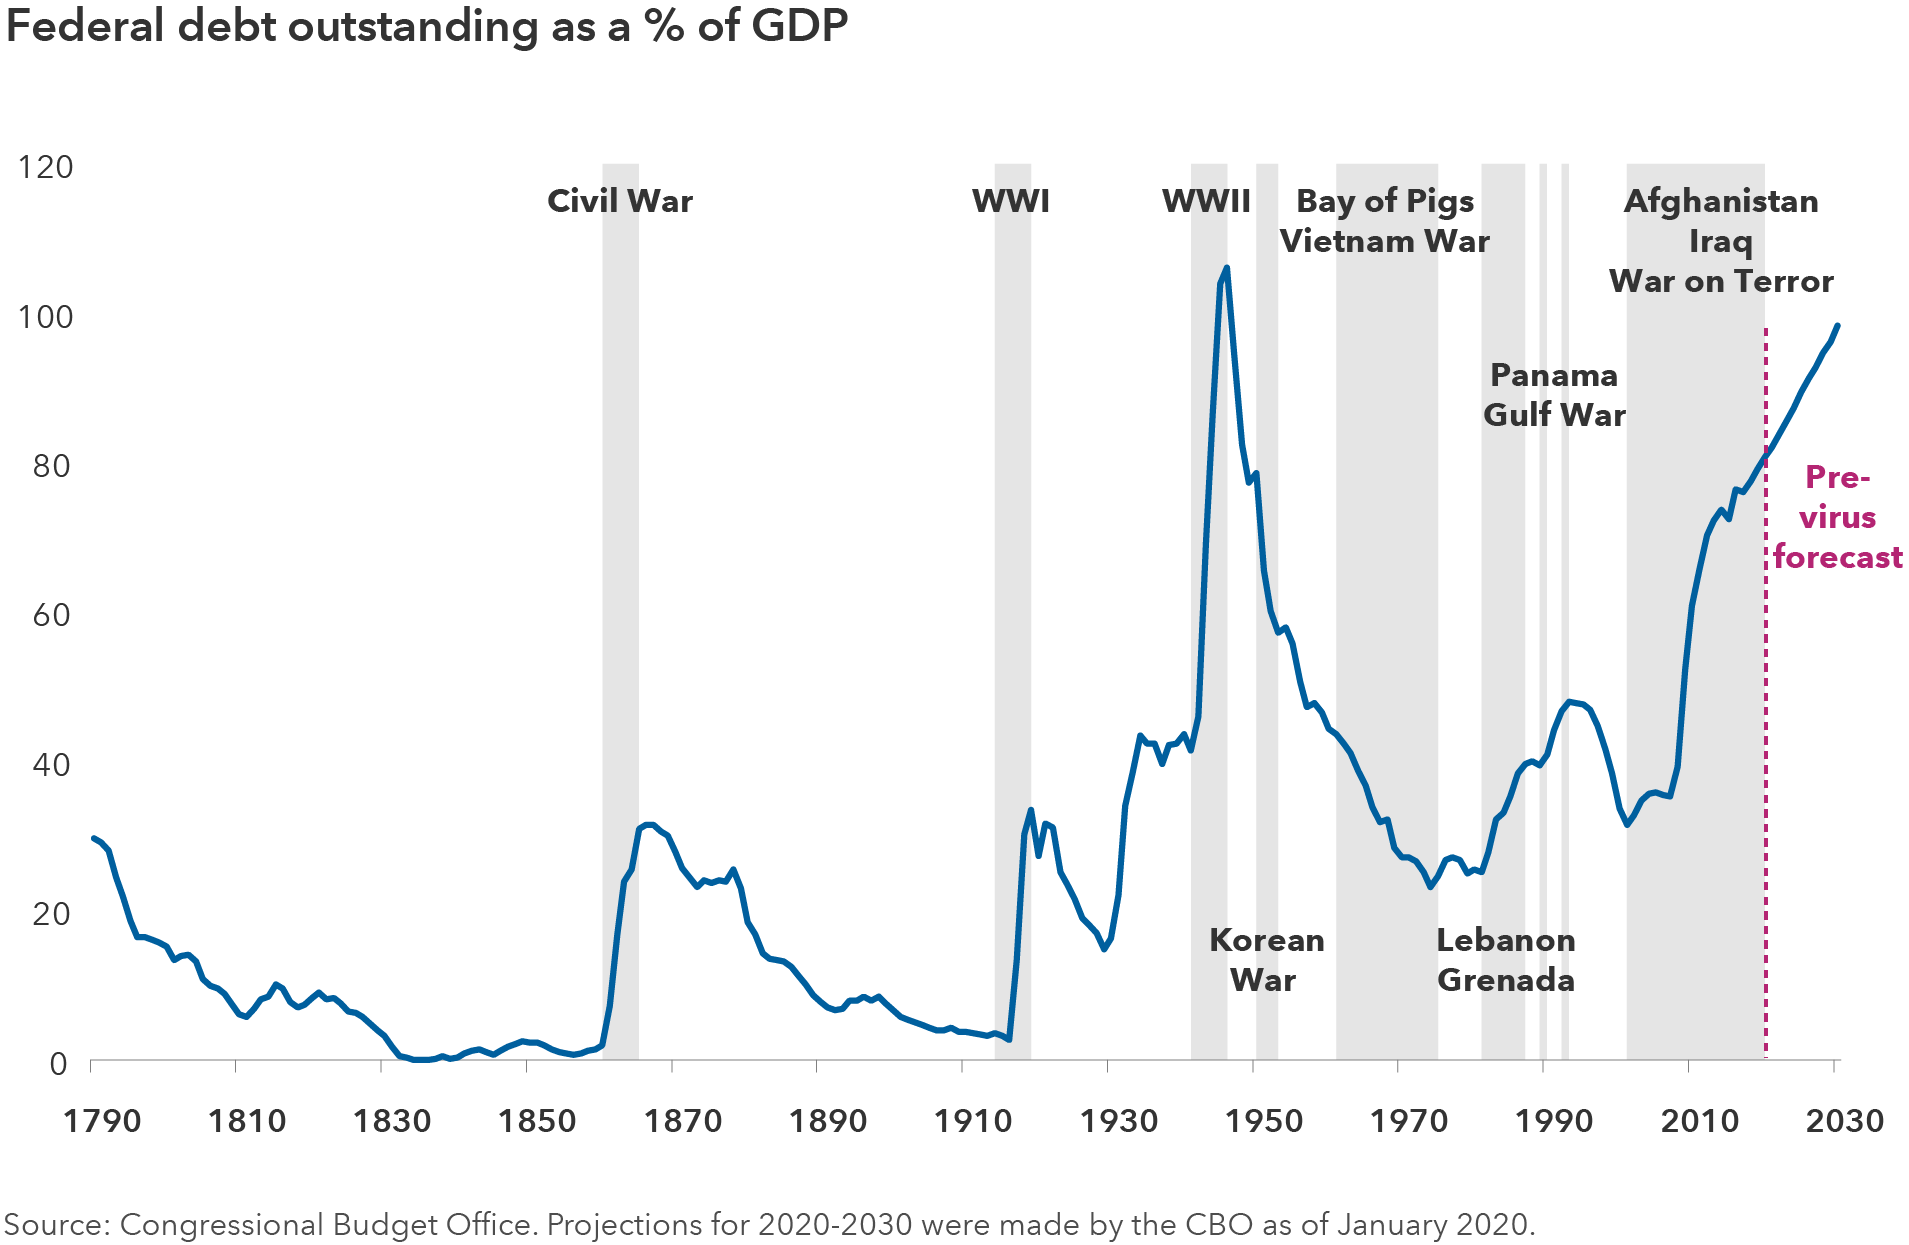 Chart displays the United States federal debt as a percentage of GDP for the years 1790 through 2030. The period from 2020 to 2030 is a forecast made prior to the virus outbreak in the United States. The chart shows a steady increase from a reading of 31.5% in 2001 to 79.2% in 2019. From there it is forecast to rise steadily to 98.3% in 2030. The highest reading is 106.1% in 1946, following World War Two. Prior spikes to the low 30% range occurred following World War One and the Civil War. 